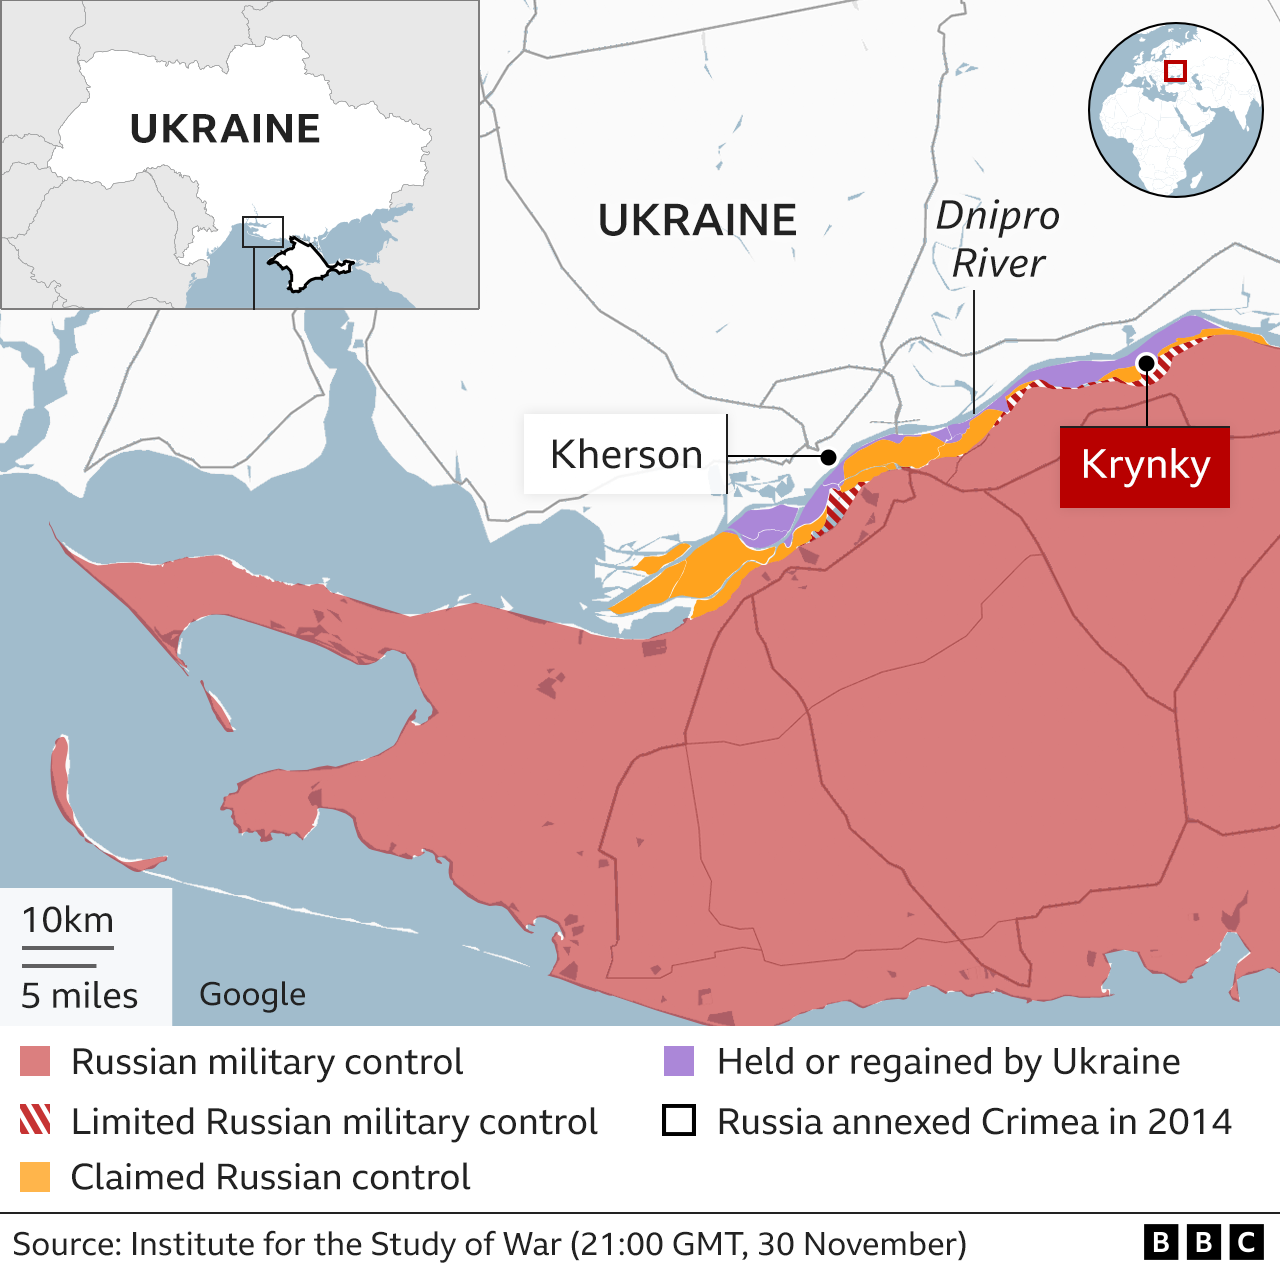 Map showing front lines on Dnipro river in Ukraine